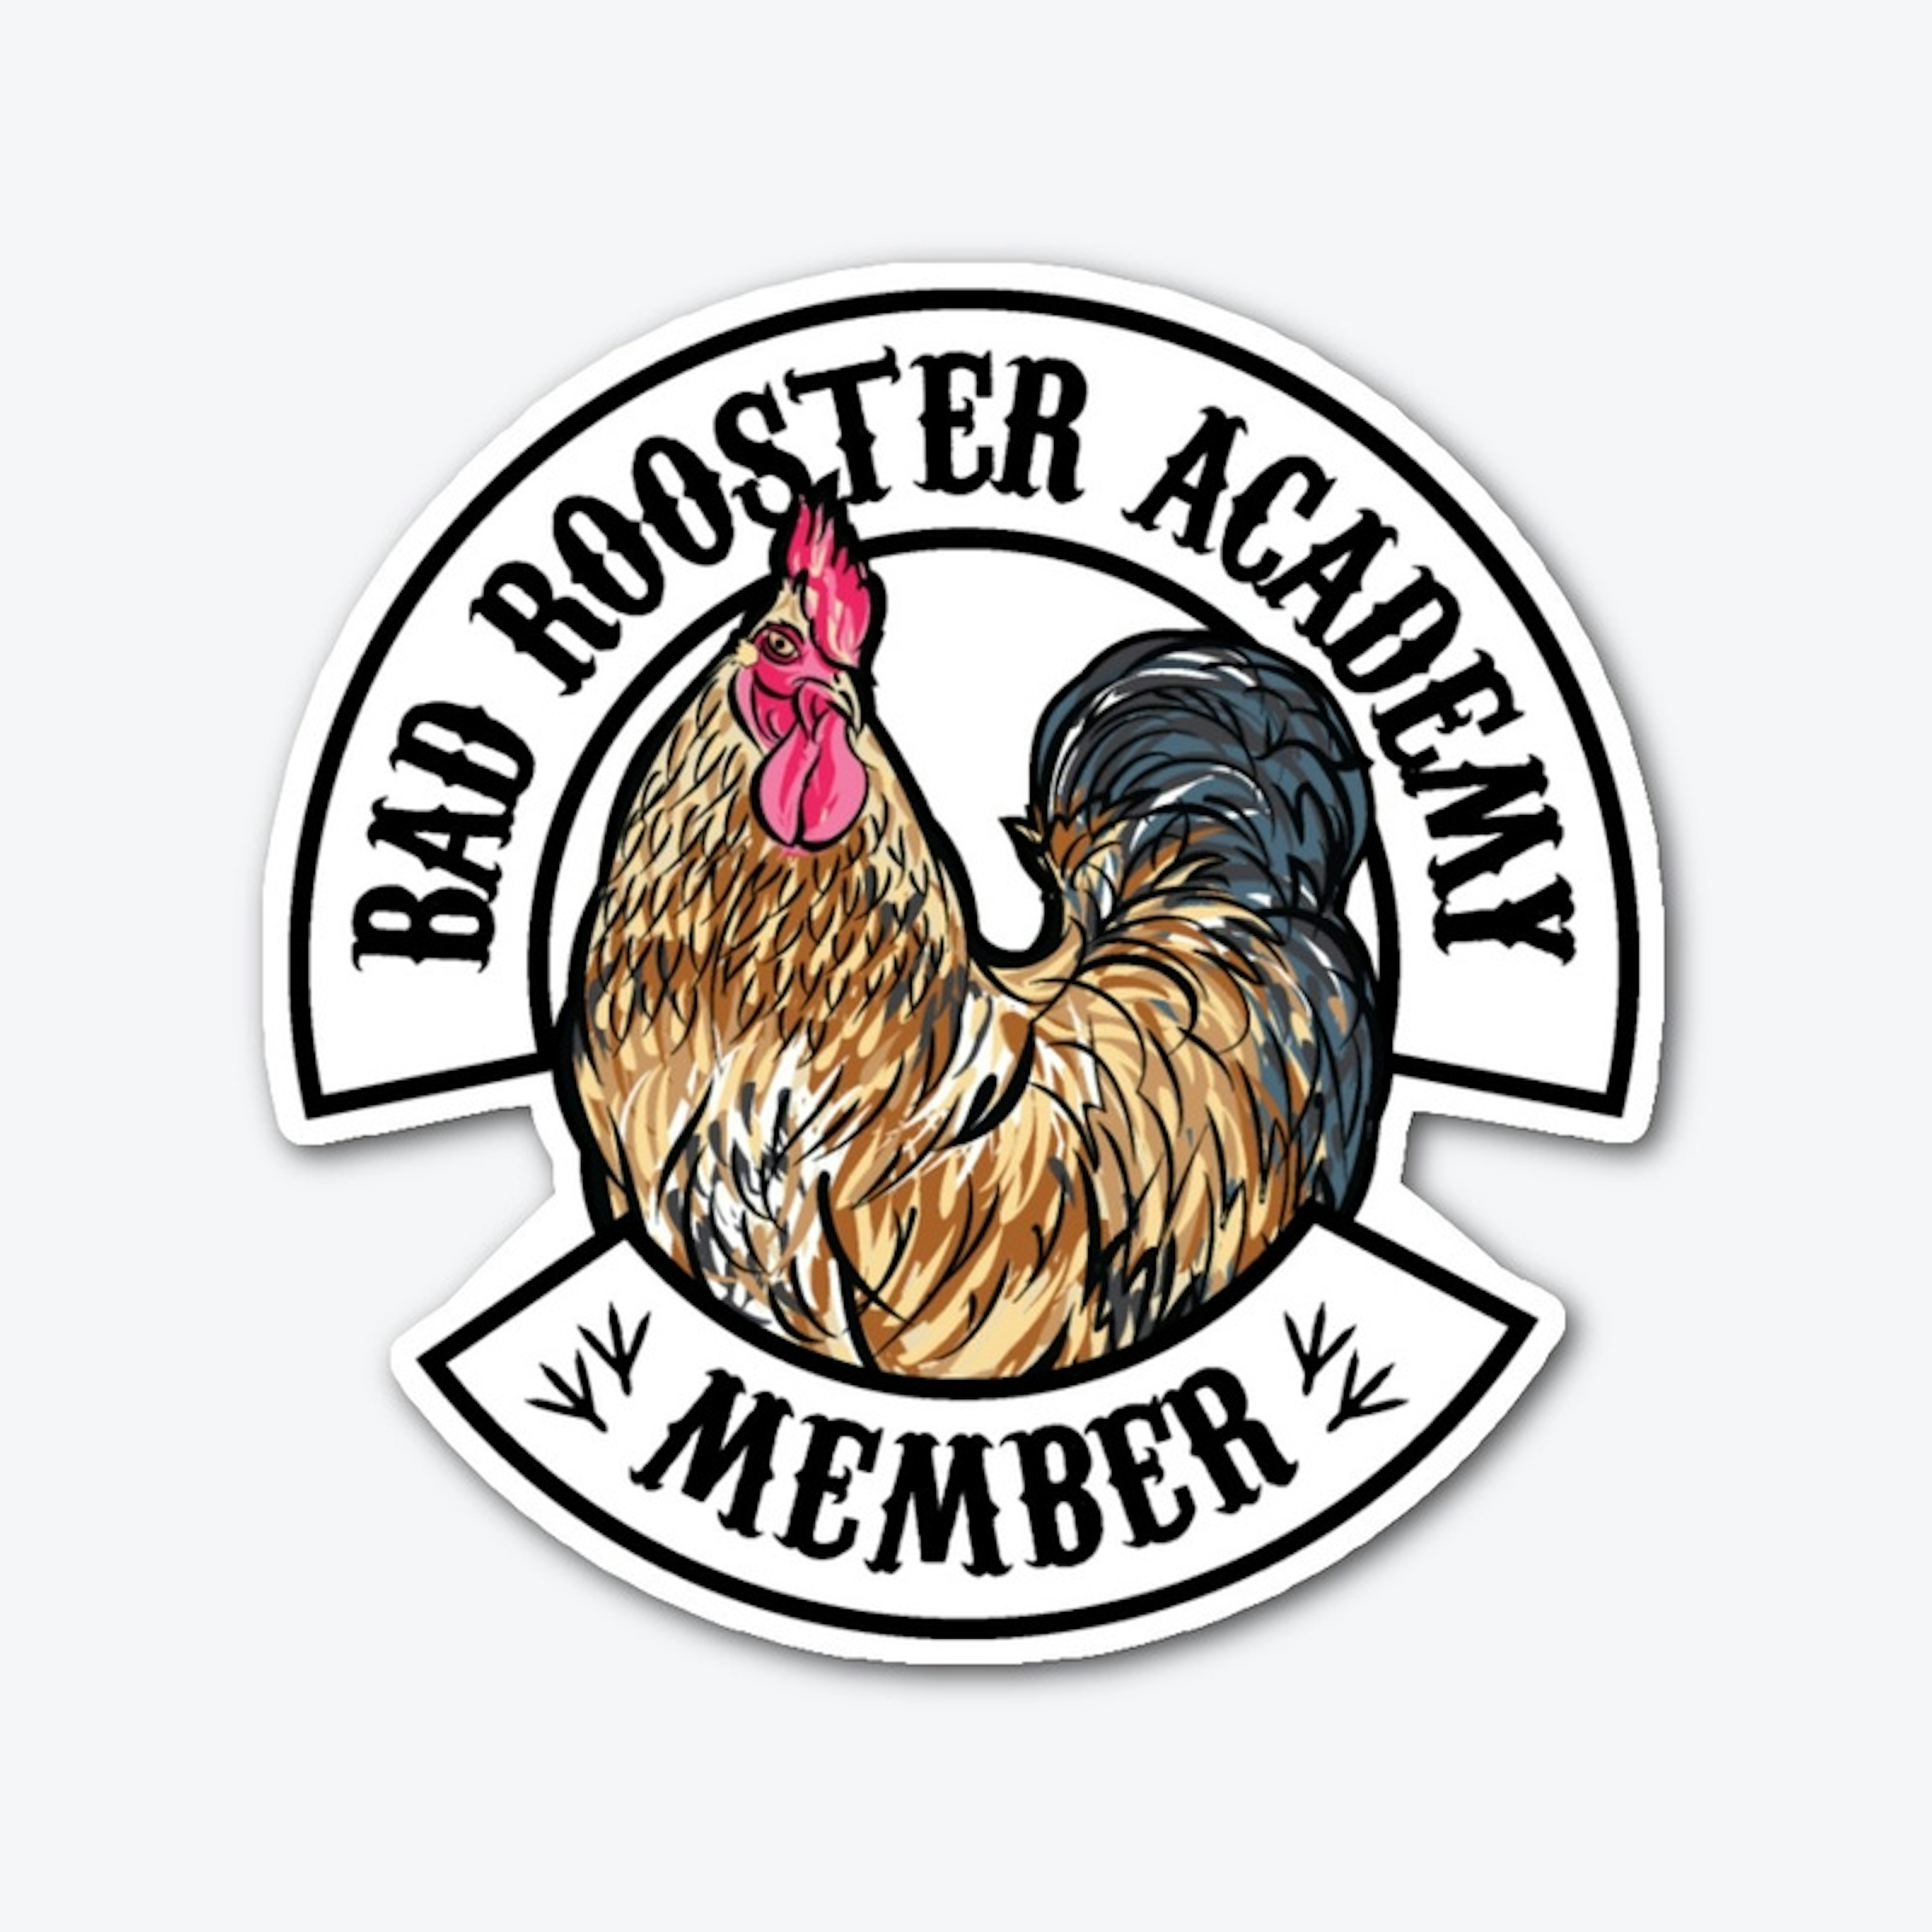 Bad Rooster Academy